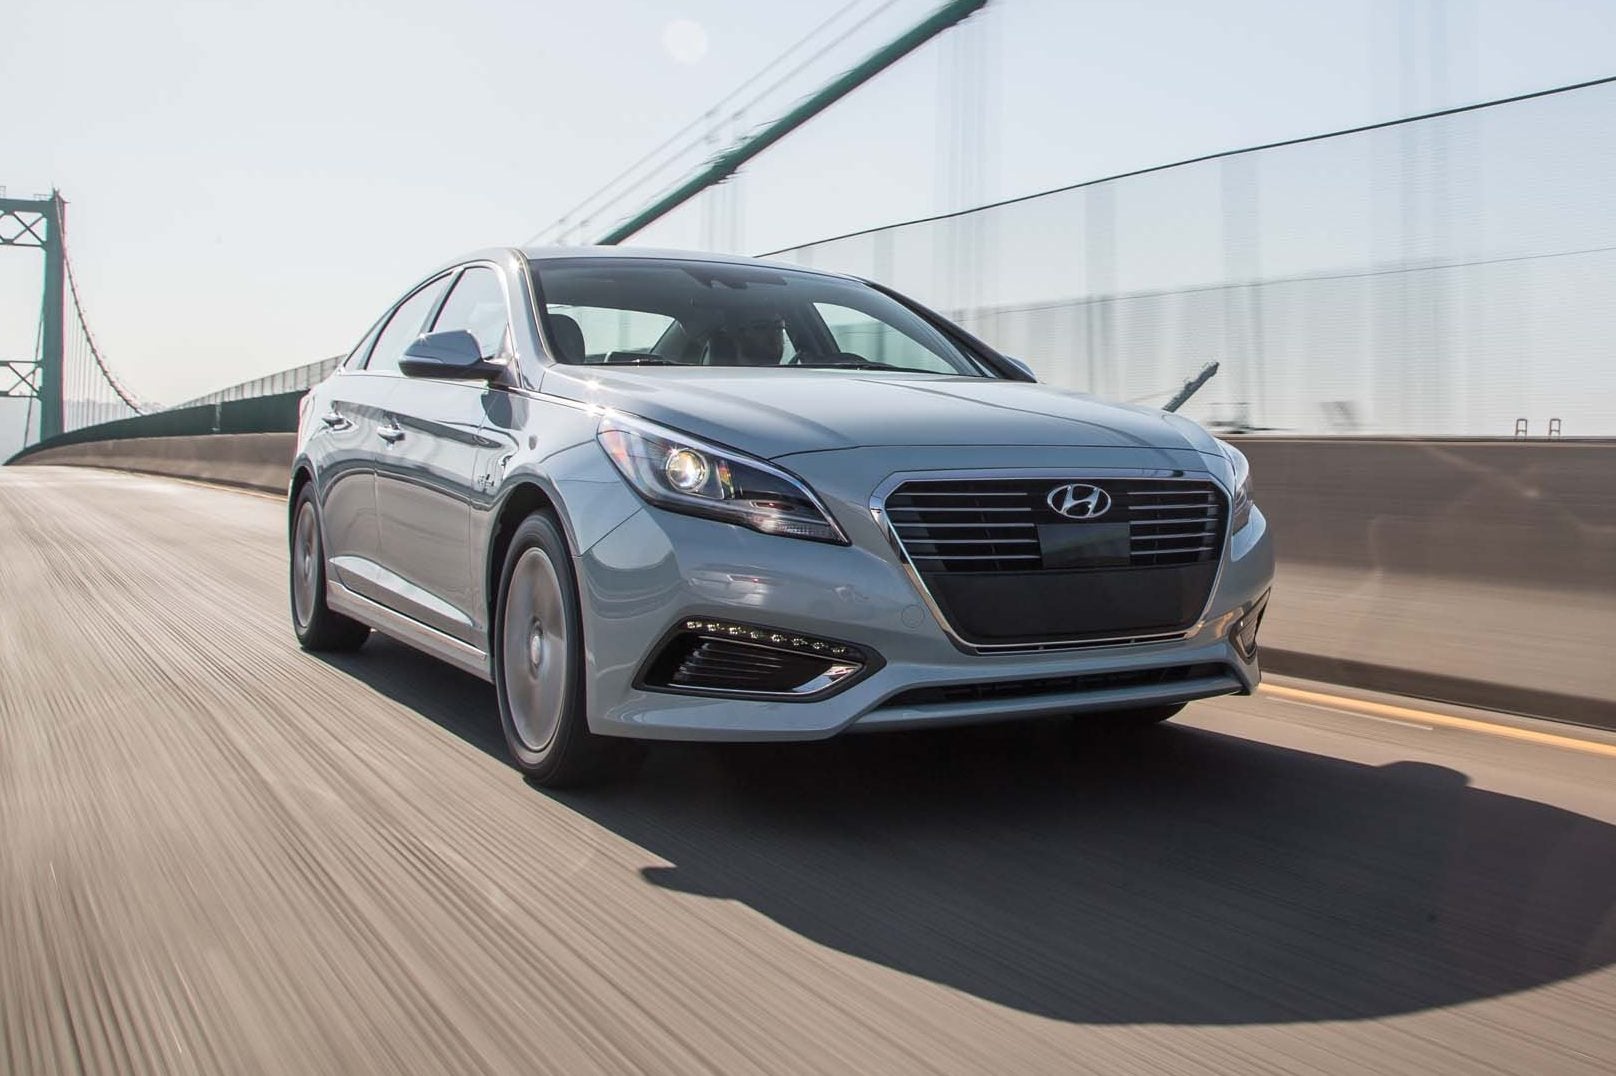 2016 Hyundai Sonata Plug-In Hybrid First Test: PHEV Motoring with an  Upscale Touch